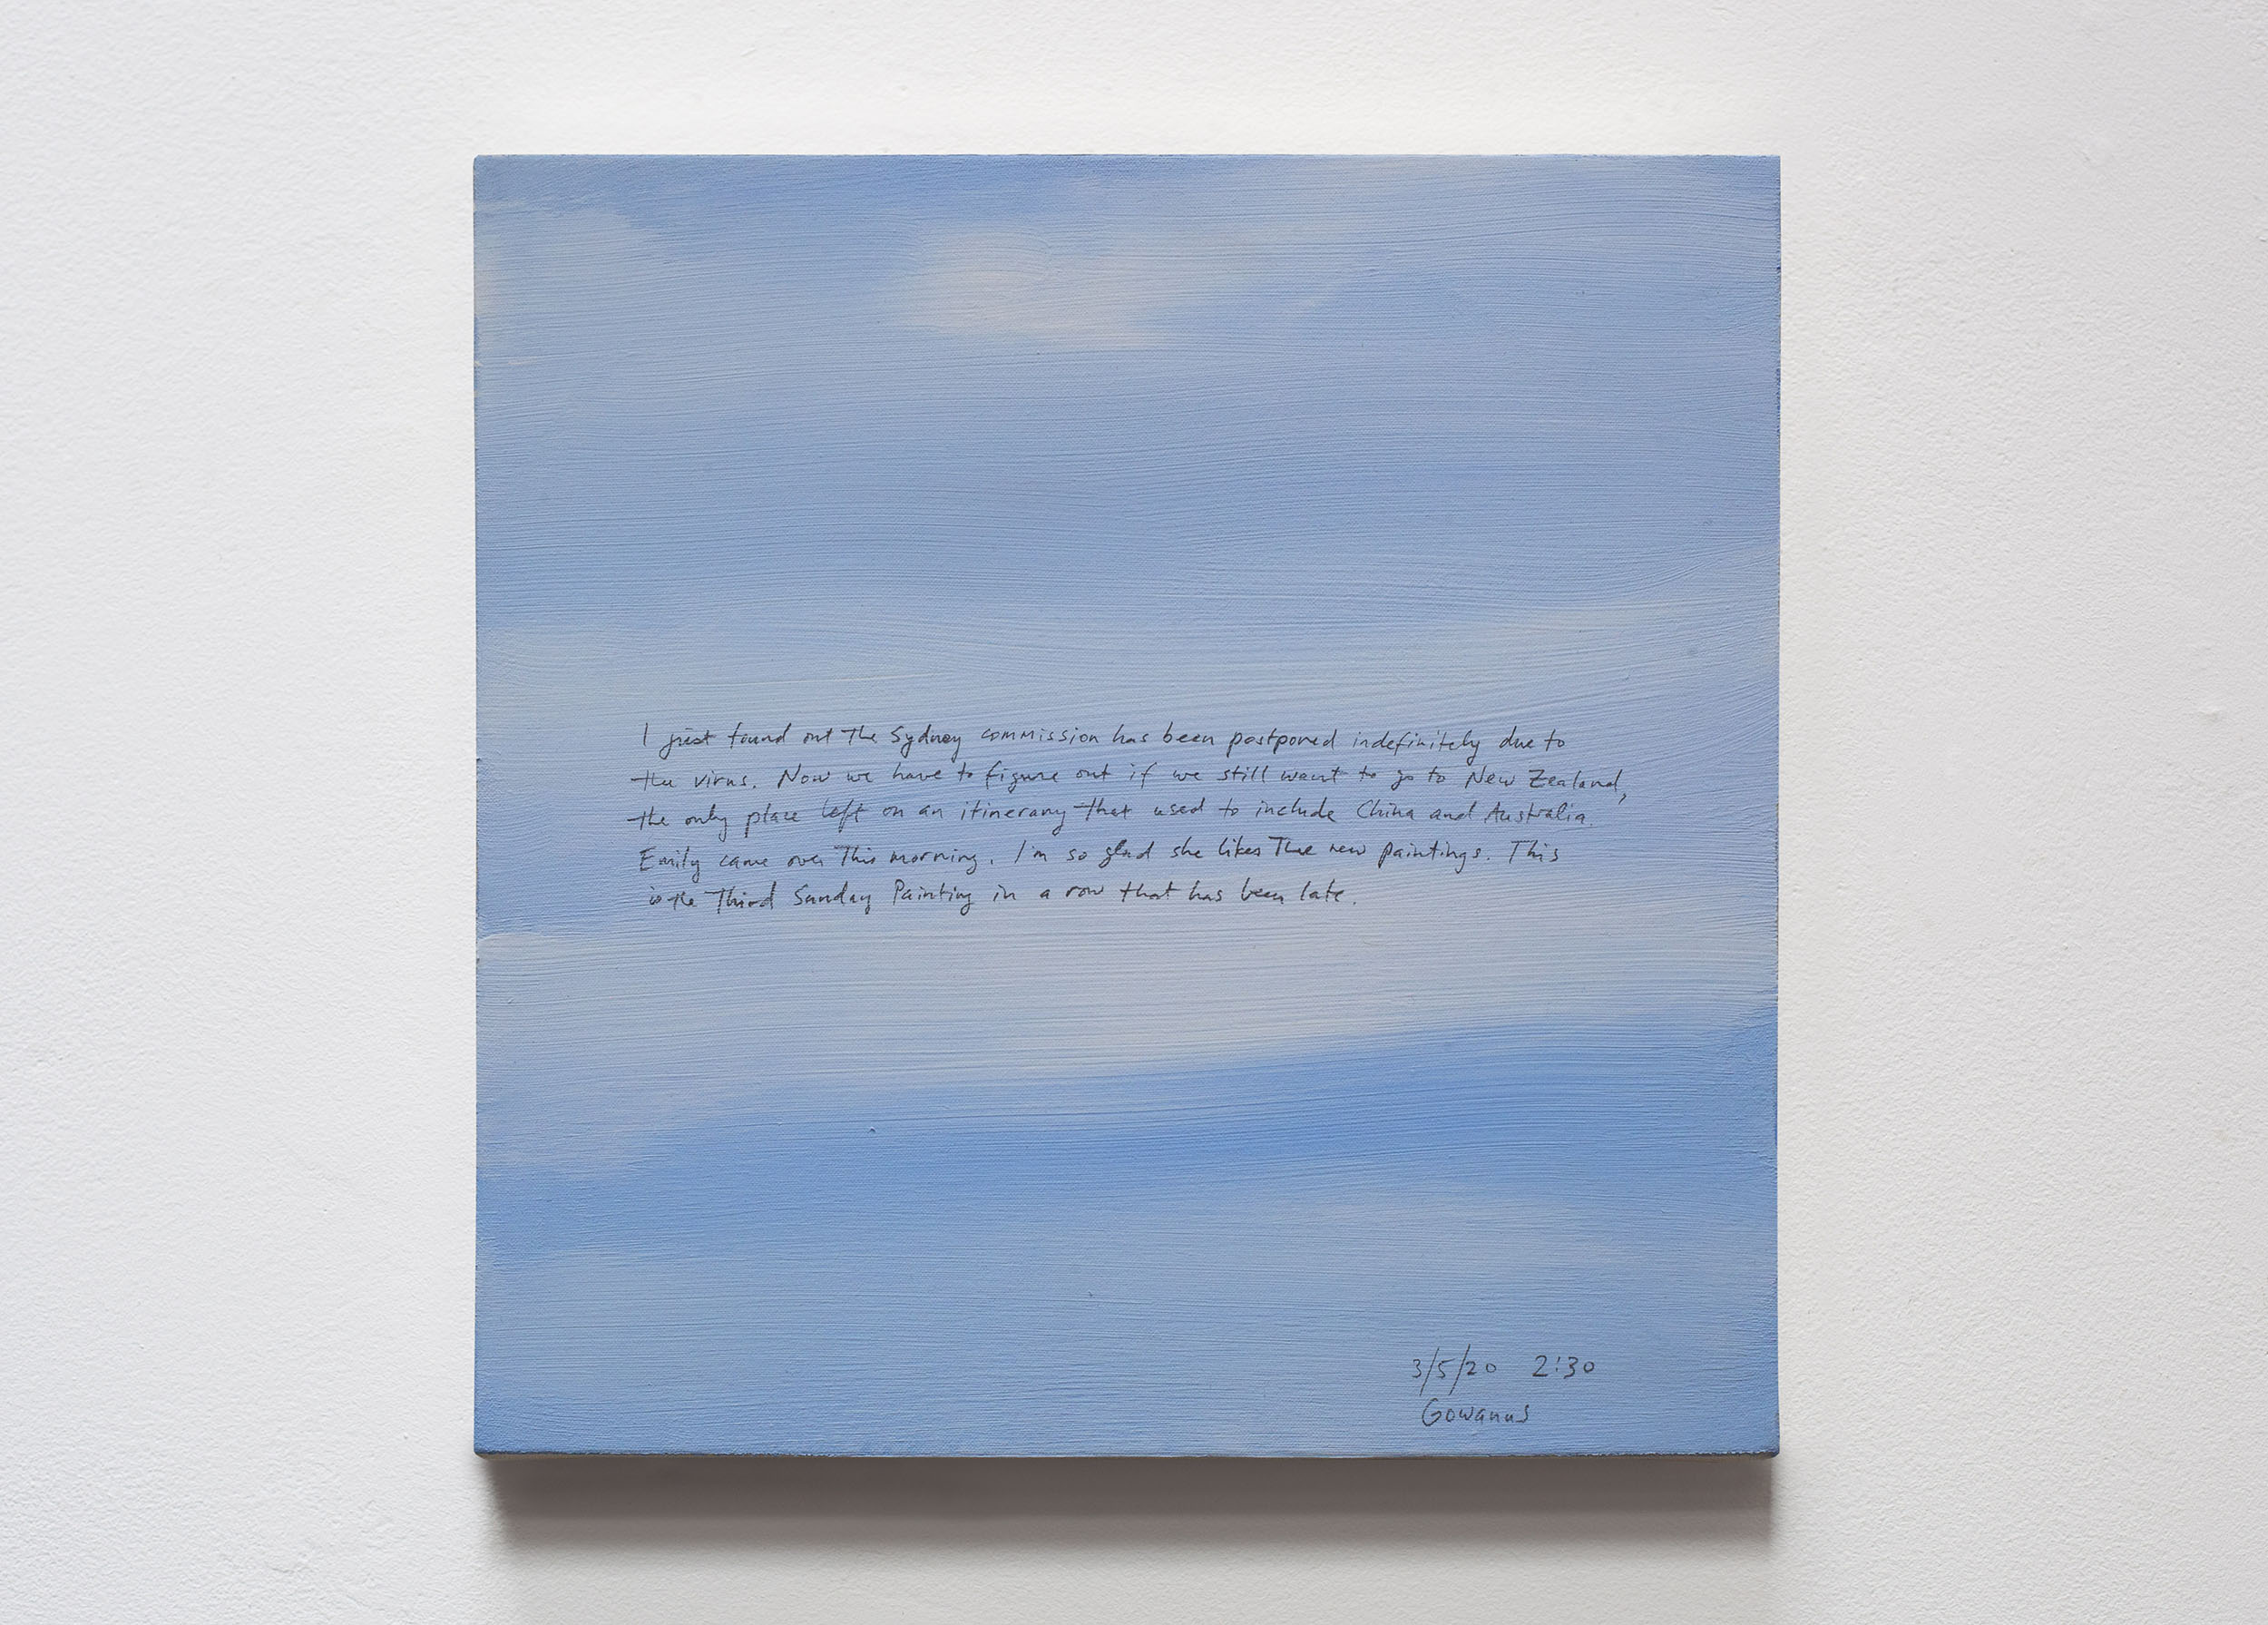 A 14 × 14 inch, acrylic painting of the sky. A journal entry is handwritten on the painting:

“I just found out the Sydney commission has been postponed indefinitely due to the virus. Now we have to figure out if we still want to go to New Zealand, the only place left on an itinerary that used to include China and Australia. Emily came over this morning. I’m so glad she likes the new paintings. This is the third Sunday Painting in a row that has been late.

3/5/20 2:30
Gowanus”